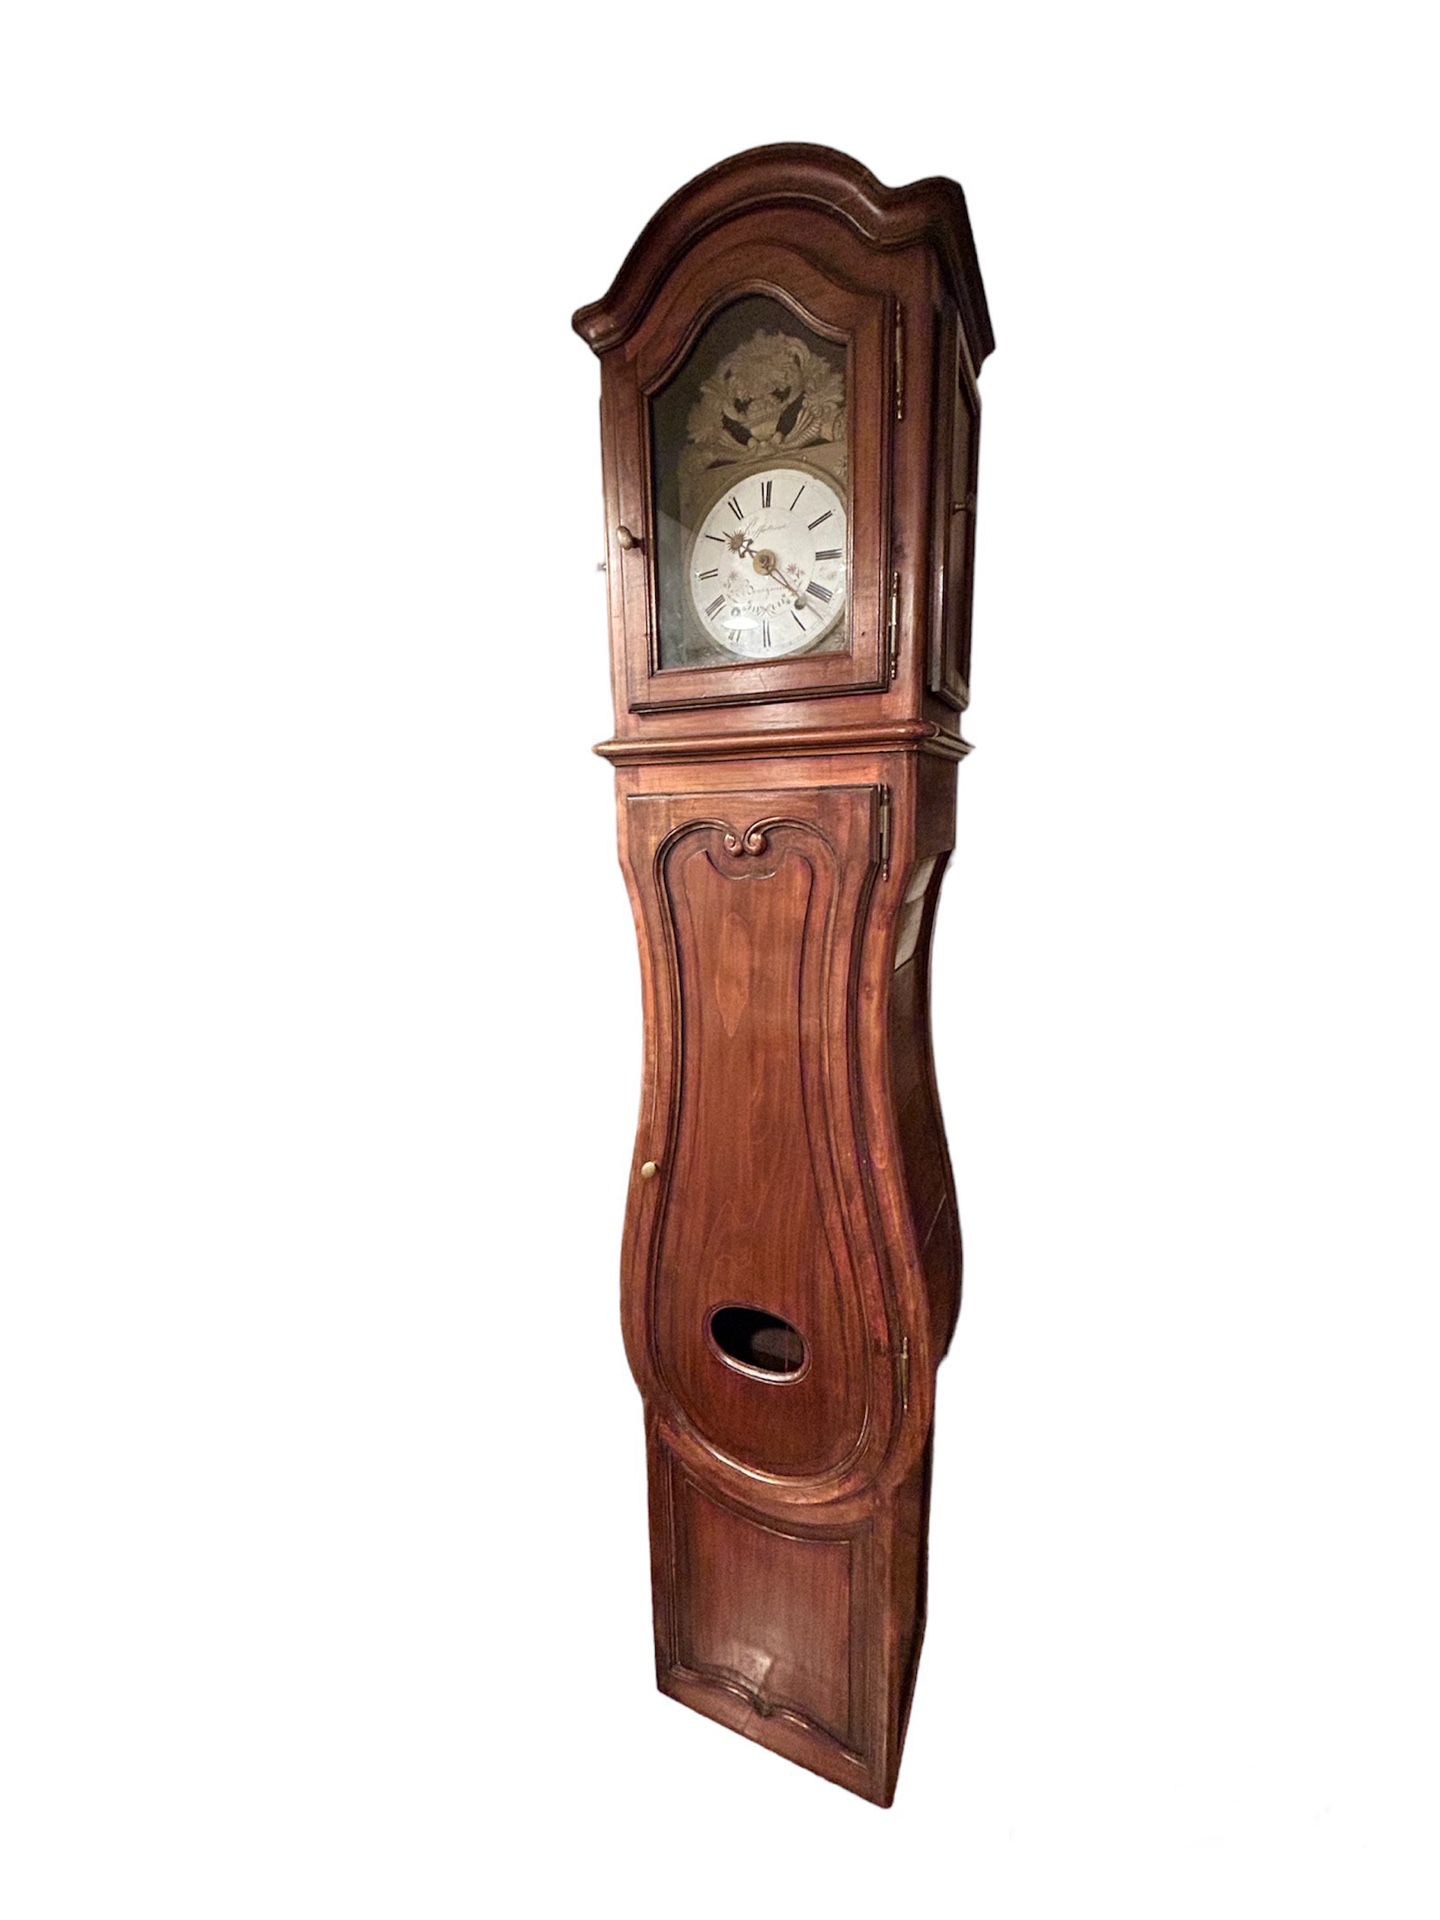 Antique French Morbier Comtoise Grandfather Clock Walnut Brass 86” Long Case